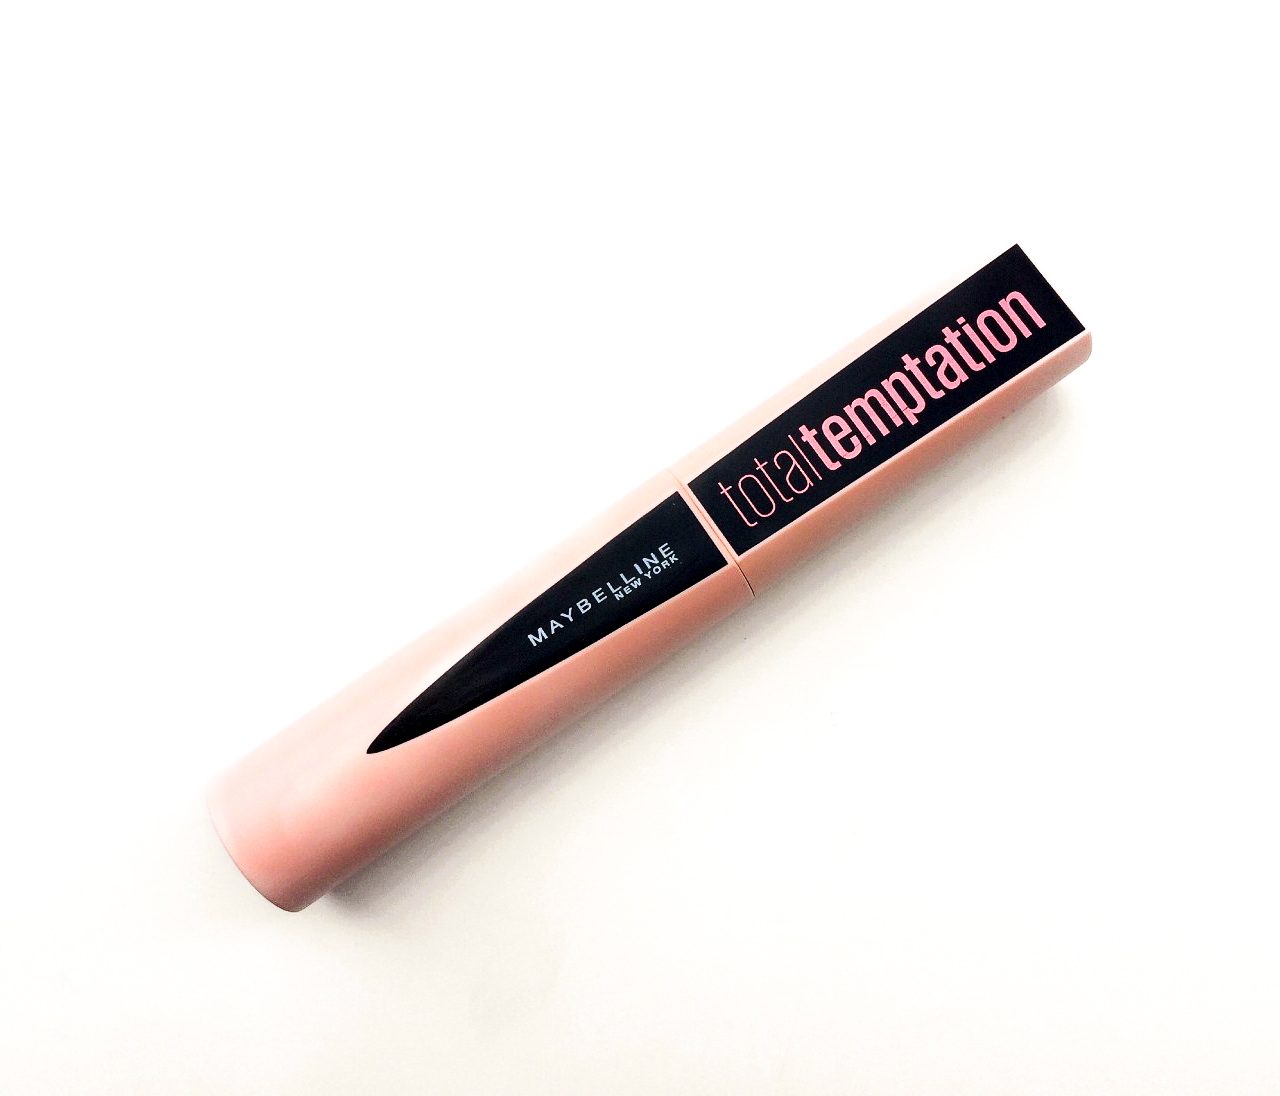 Maybelline Total Temptation Mascara | Review